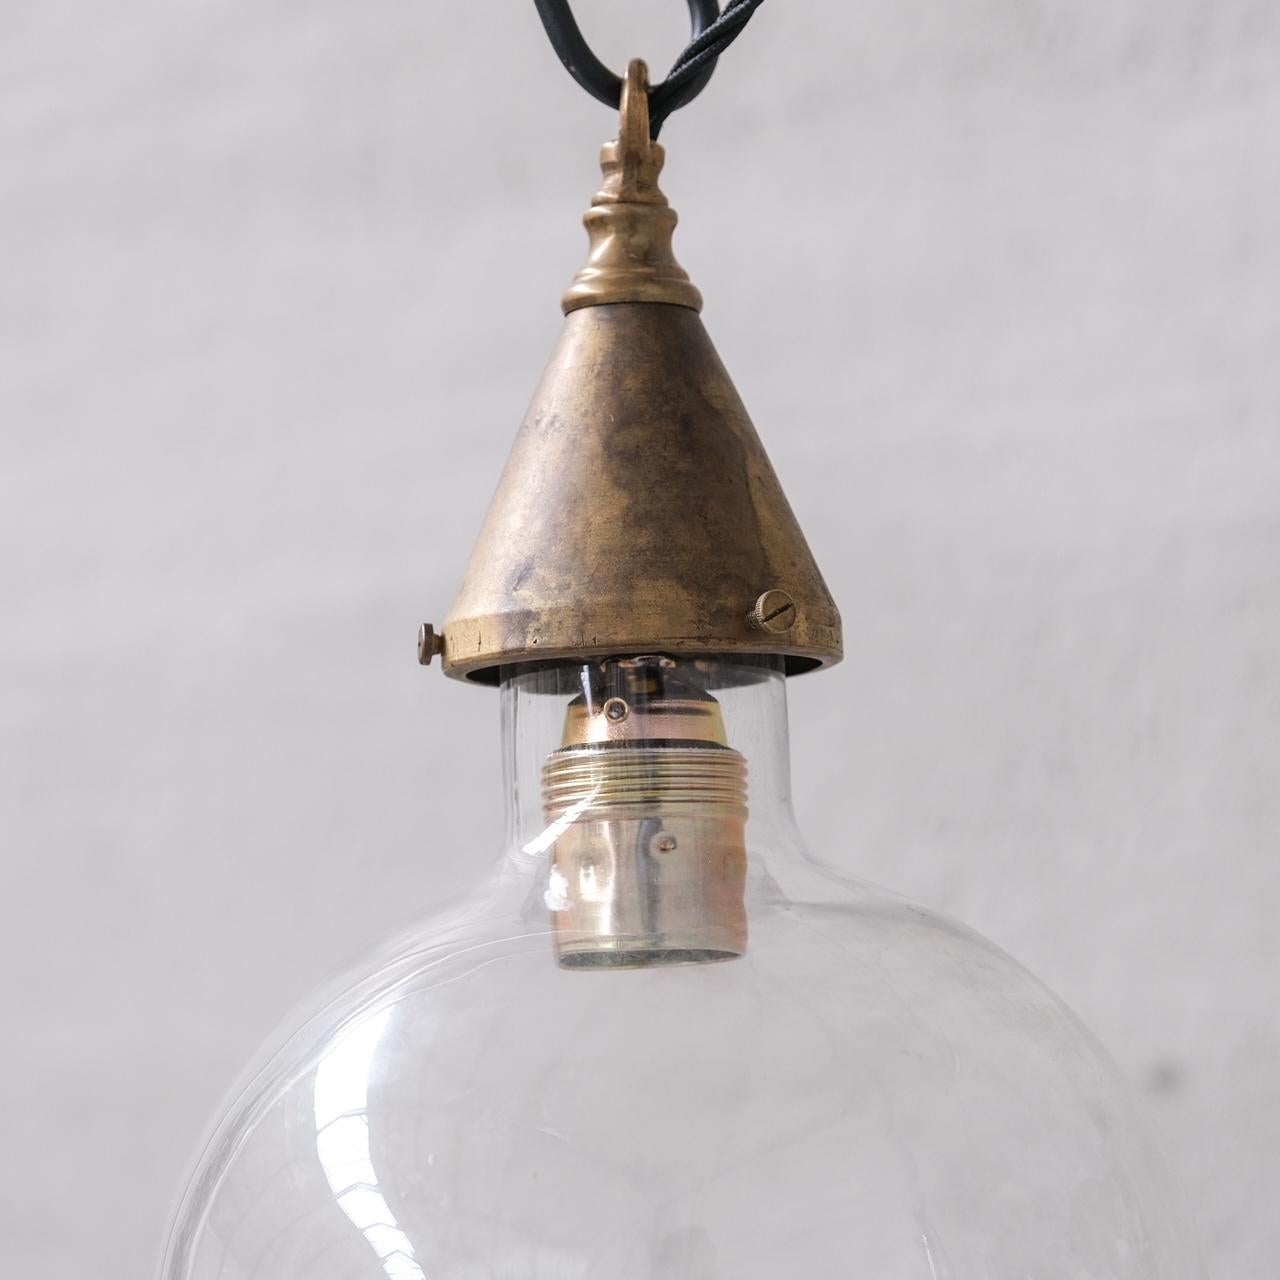 A clear glass bulb like shade pendant light, good quality brass gallery.

France, c1960s.

Single available.

No rose was retained or chain, however they are easy to source online.

Good vintage condtion, re-wired and PAT tested.

Location: Belgium